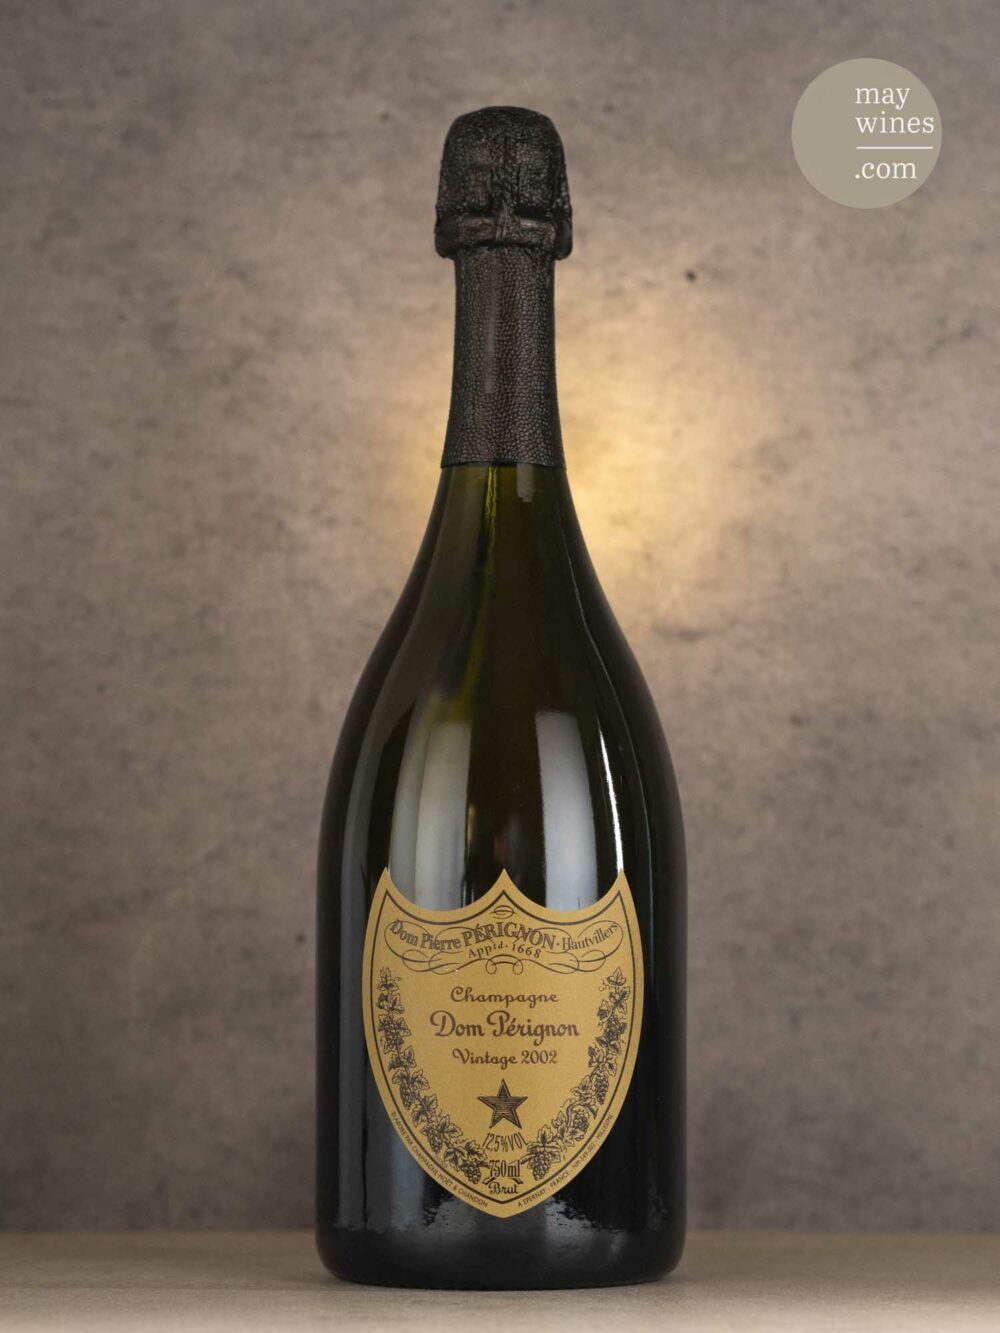 May Wines – Champagner – 2002 Dom Pérignon - Moët & Chandon